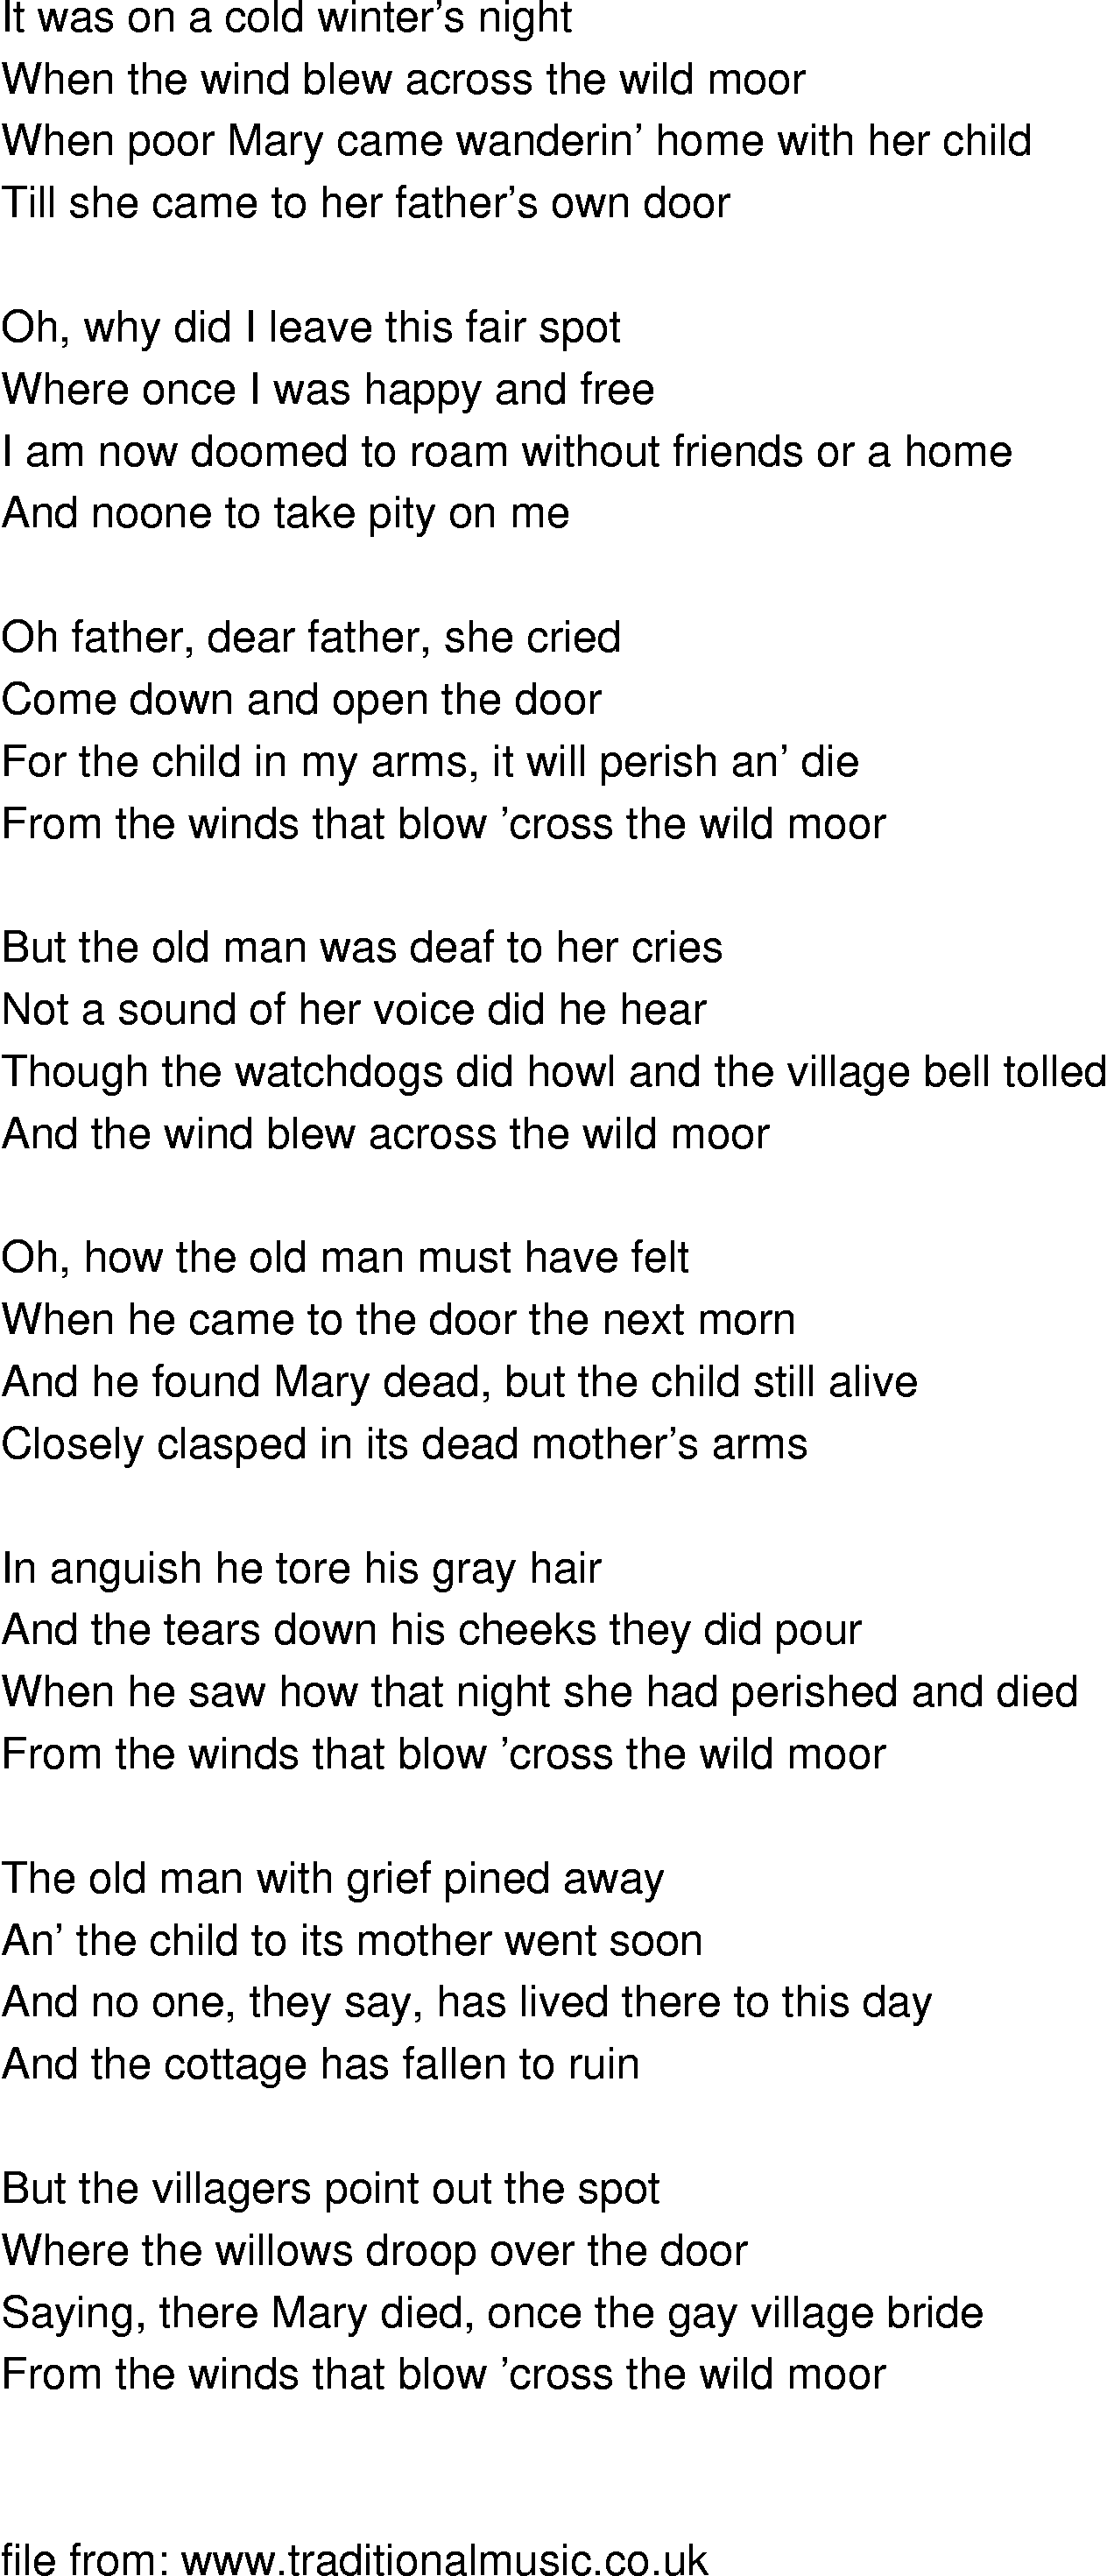 Old-Time (oldtimey) Song Lyrics - mary of the wild moor